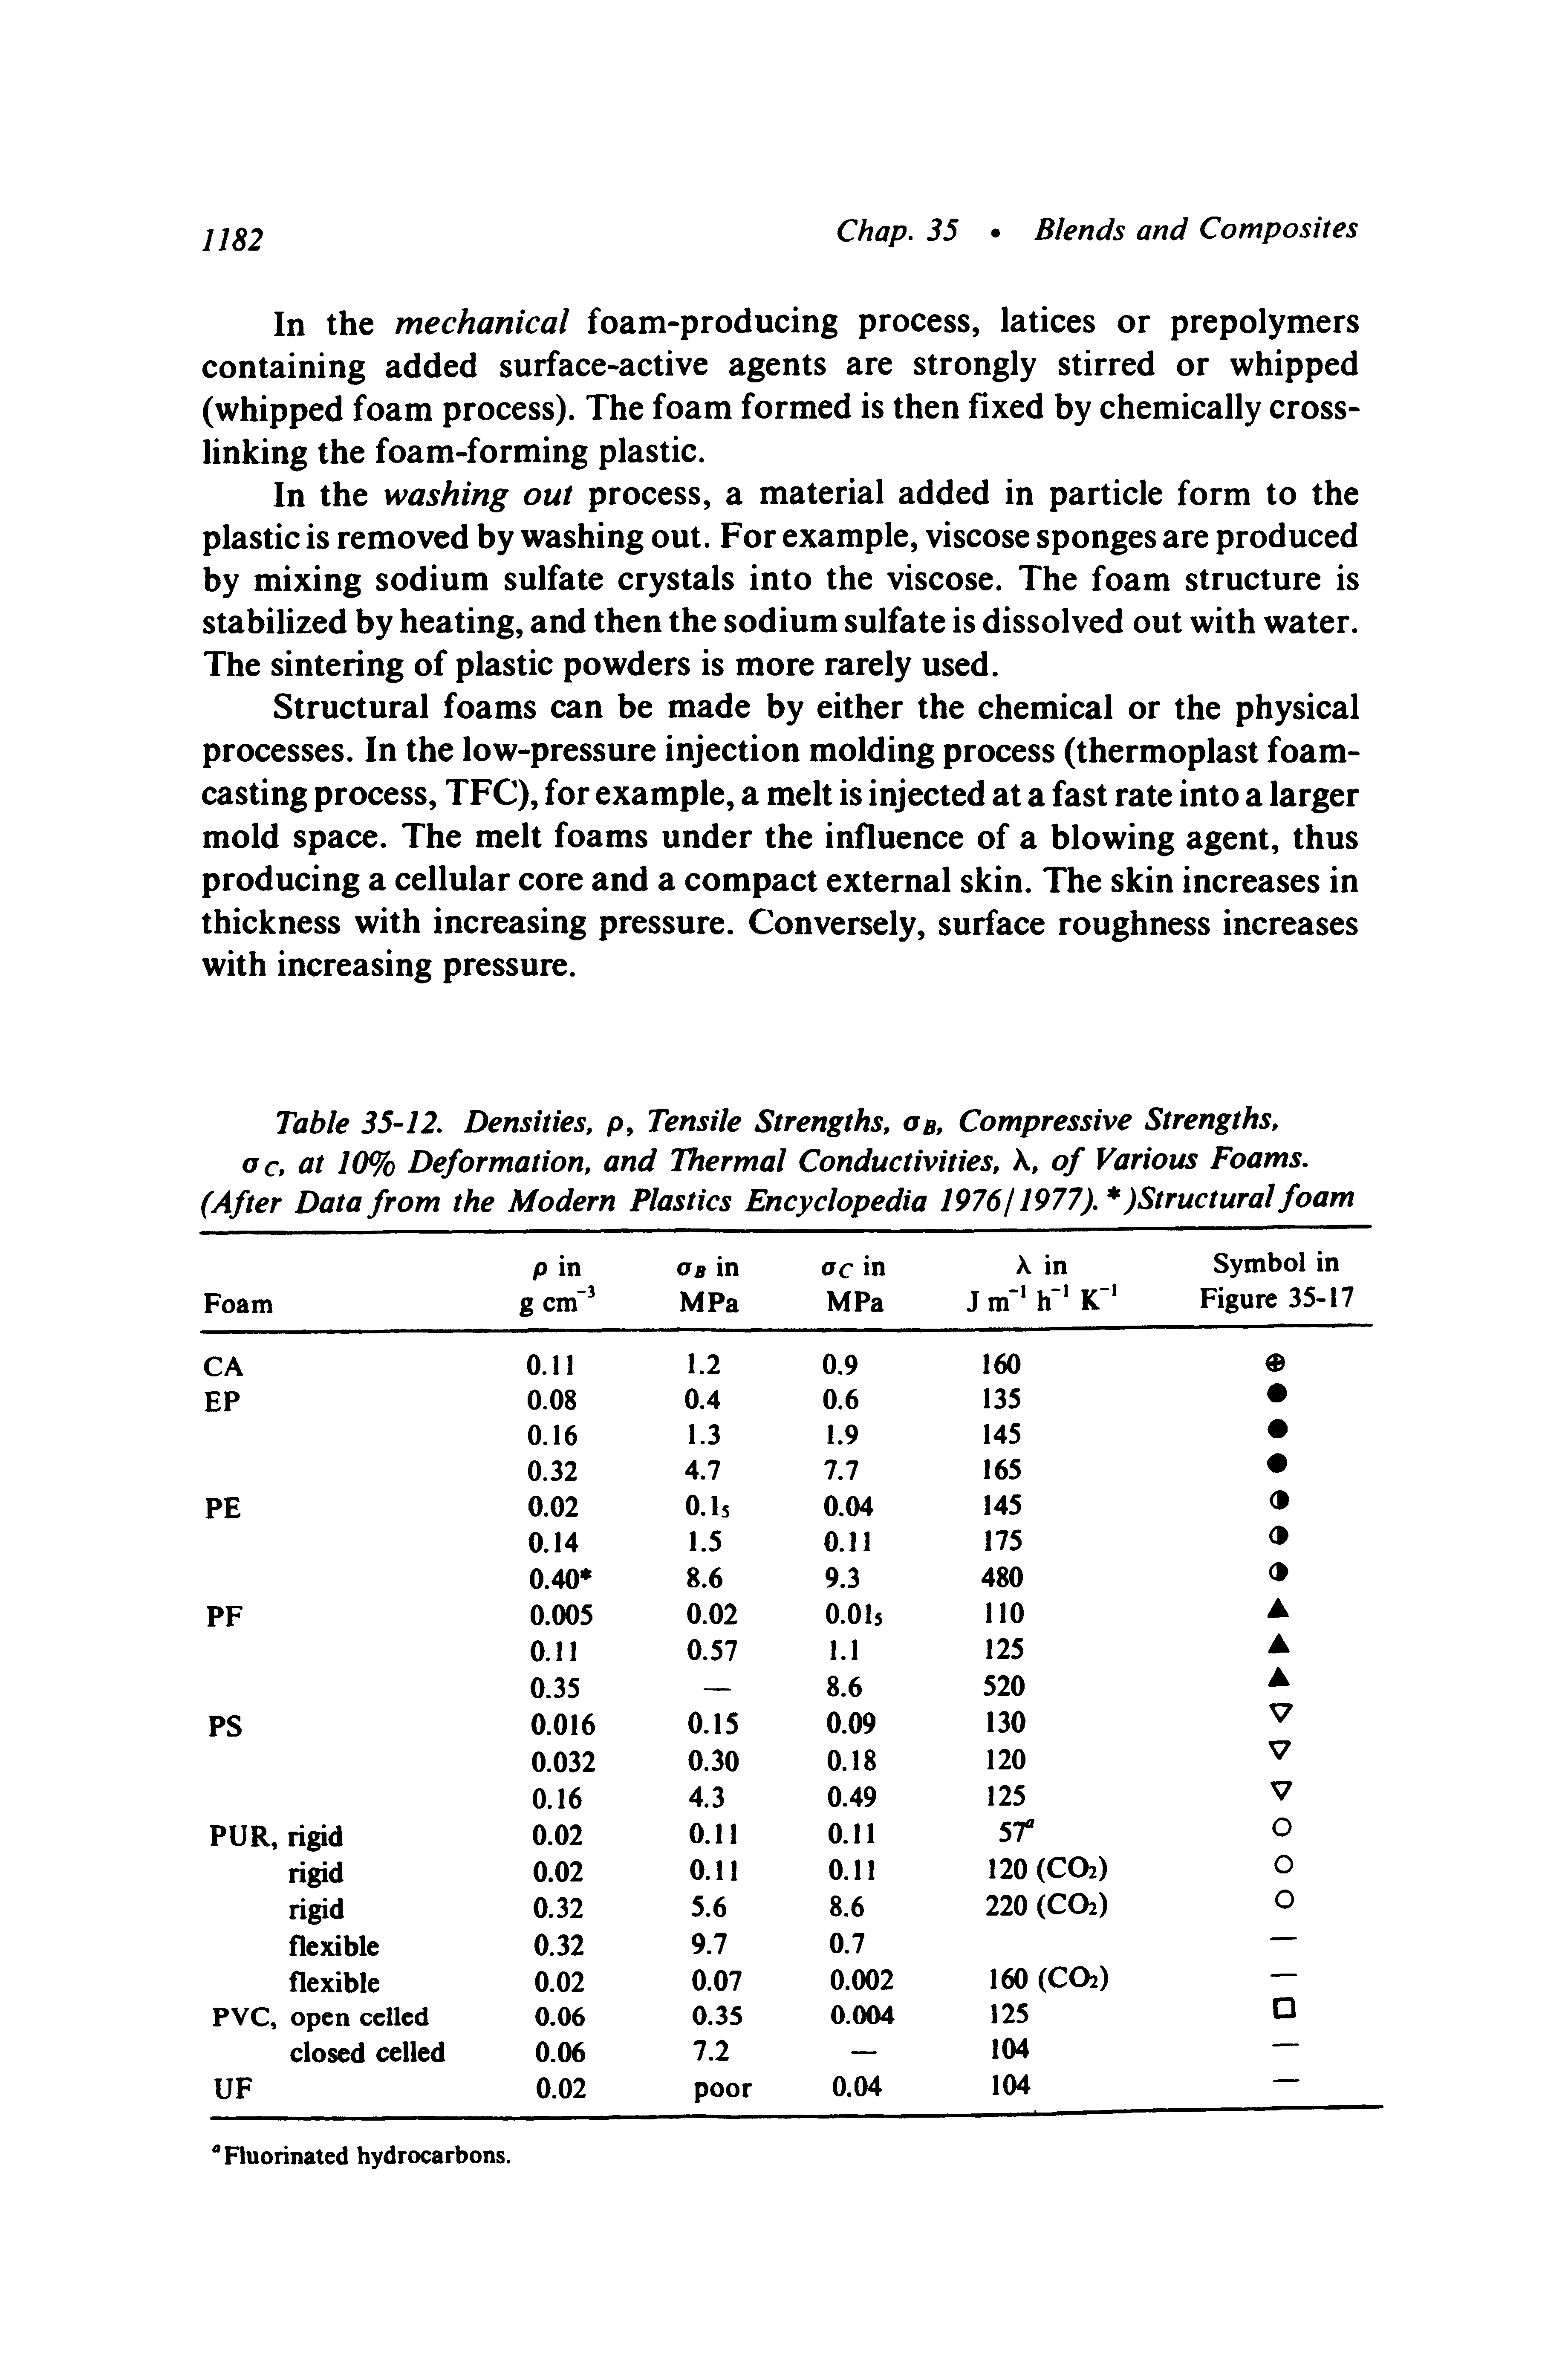 Table 35-12. Densities, p. Tensile Strengths, ob. Compressive Strengths, ac, at 10% Deformation, and Thermal Conductivities, X, of Various Foams. (After Data from the Modern Plastics Encyclopedia 1976/1977). )Structural foam...